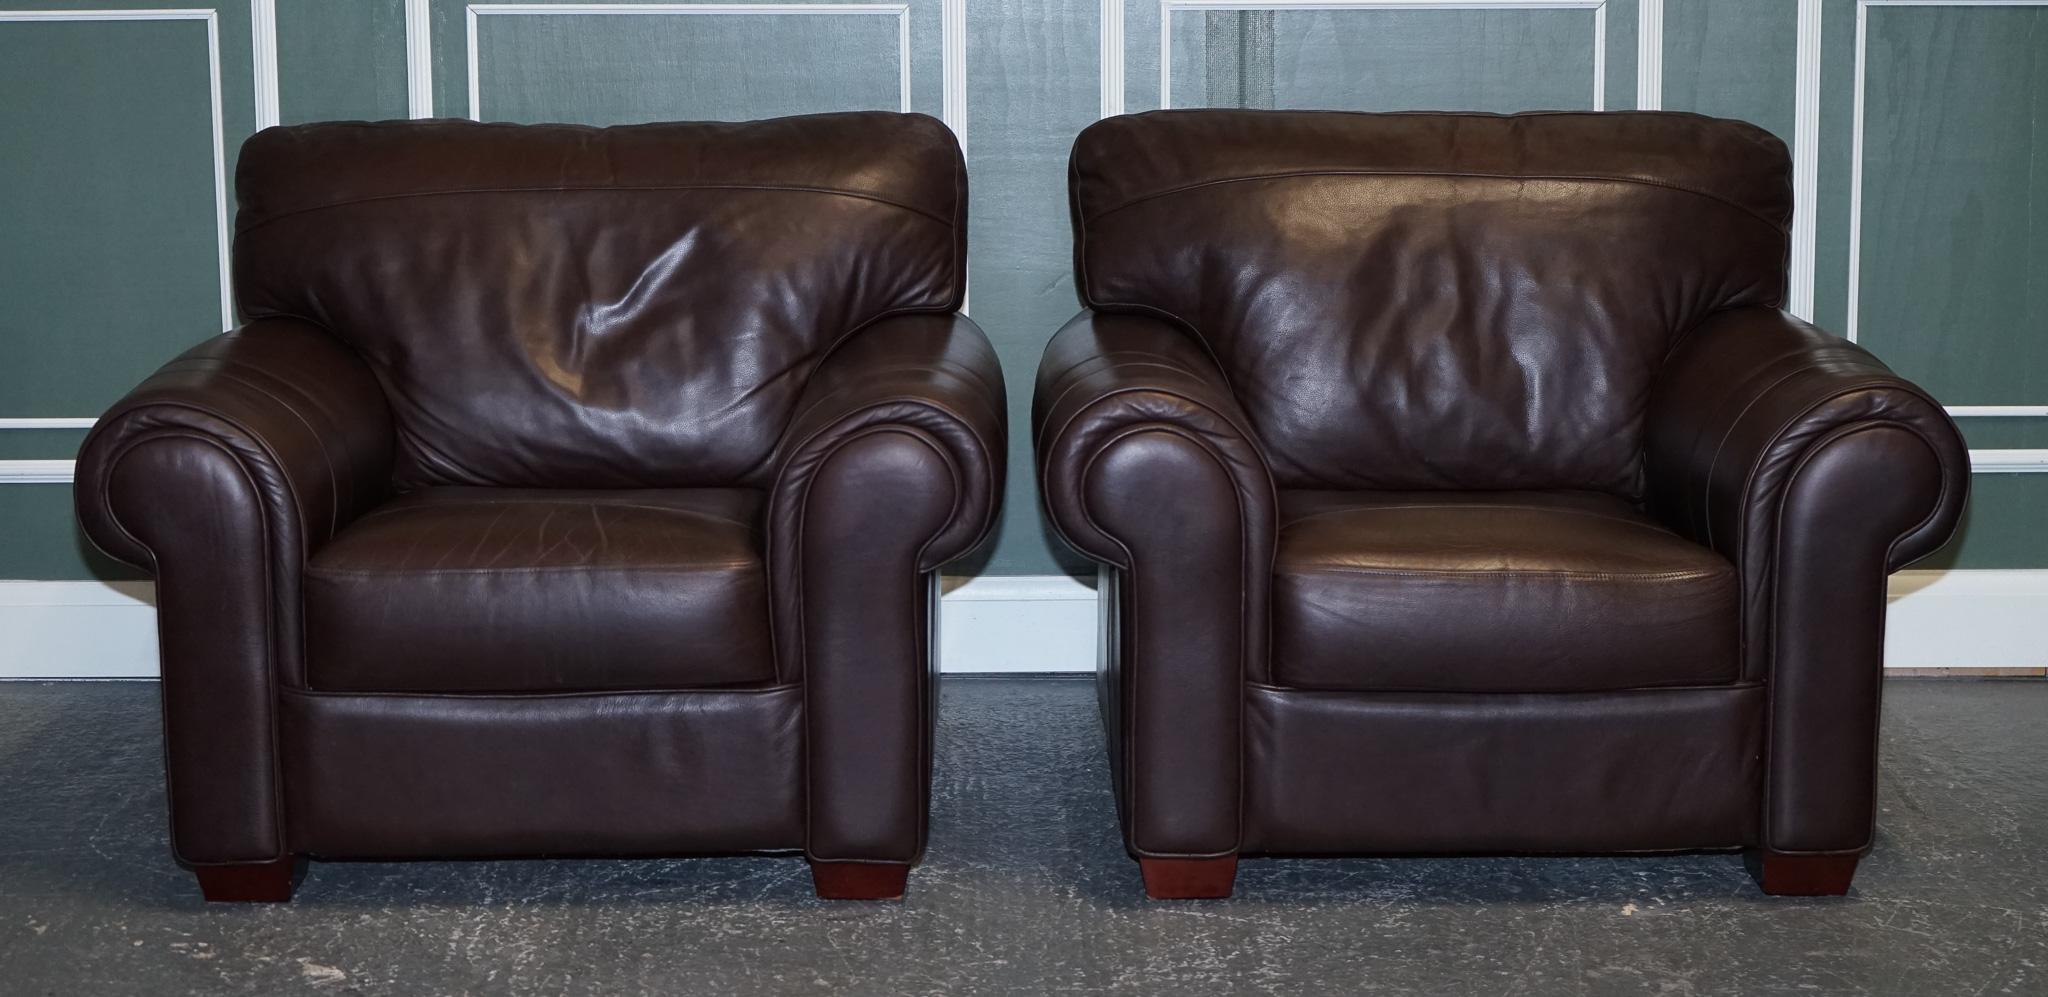 
We are excited to present this pair of large comfortable brown leather armchairs.

A good honest comfortable pair of armchairs.
They are upholstered with cowhide semi-aniline leather which is pre-dyed before upholstery.

The advantage is that the